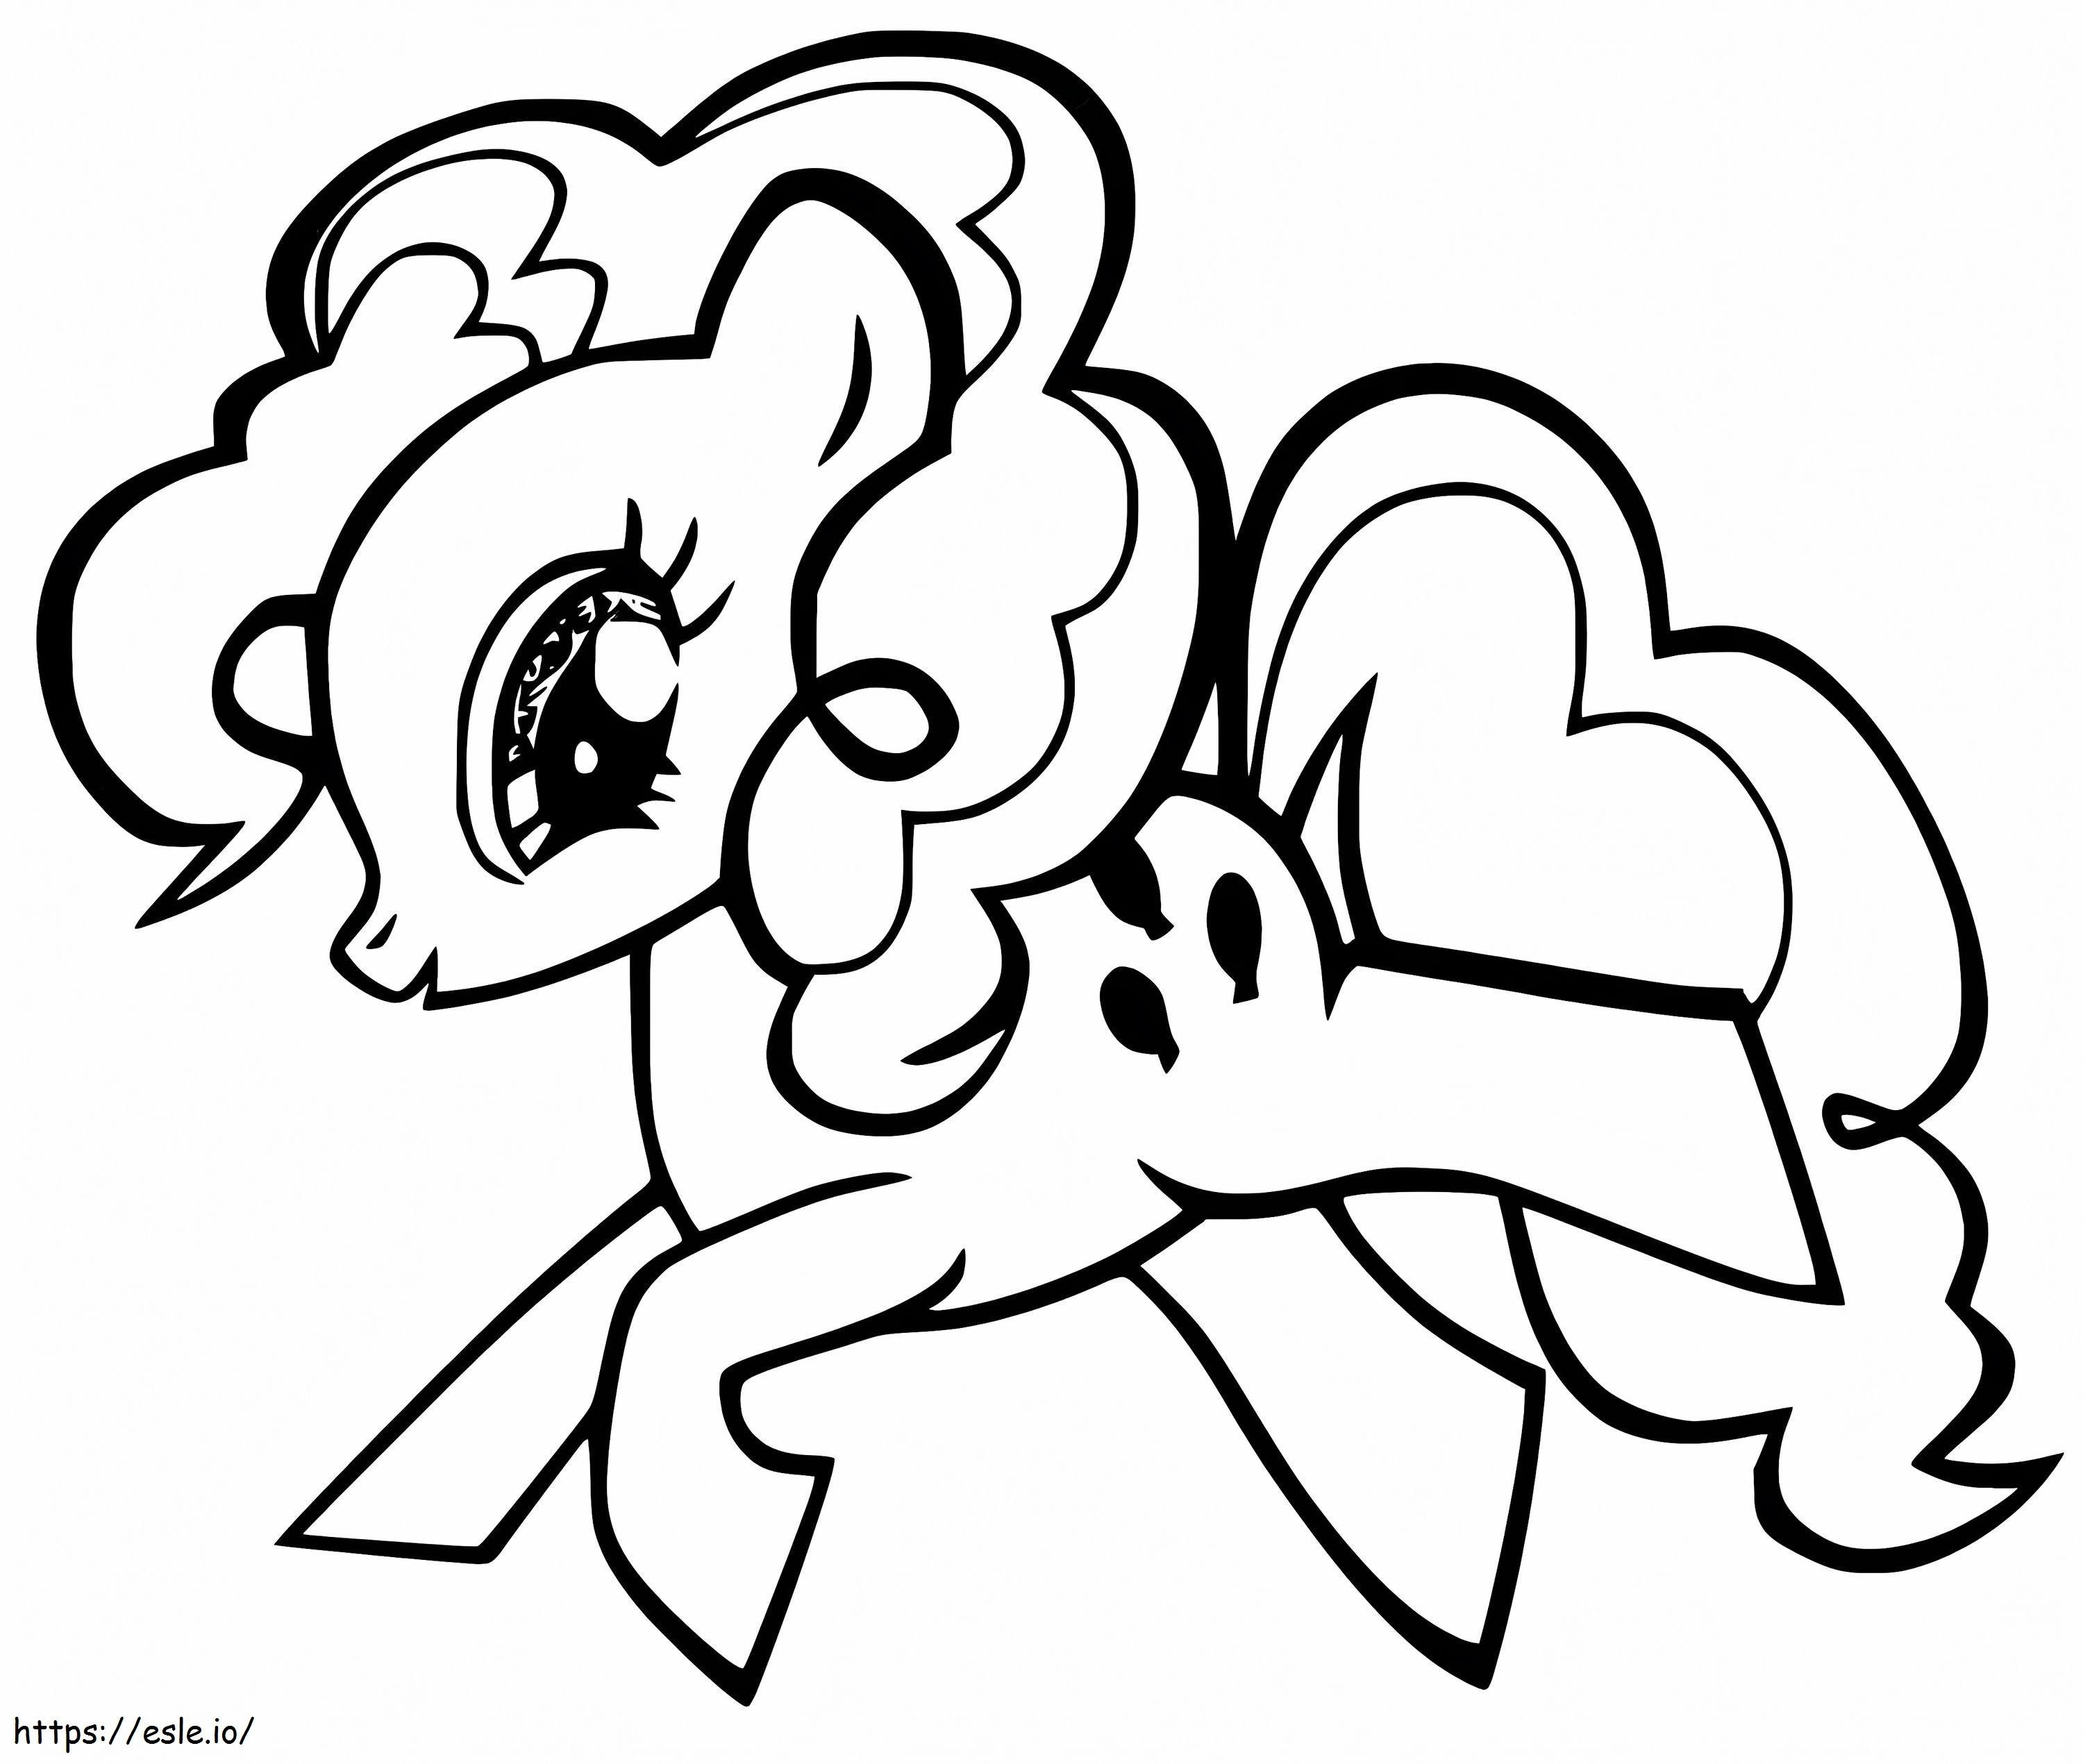 Pinkie Pie Running coloring page